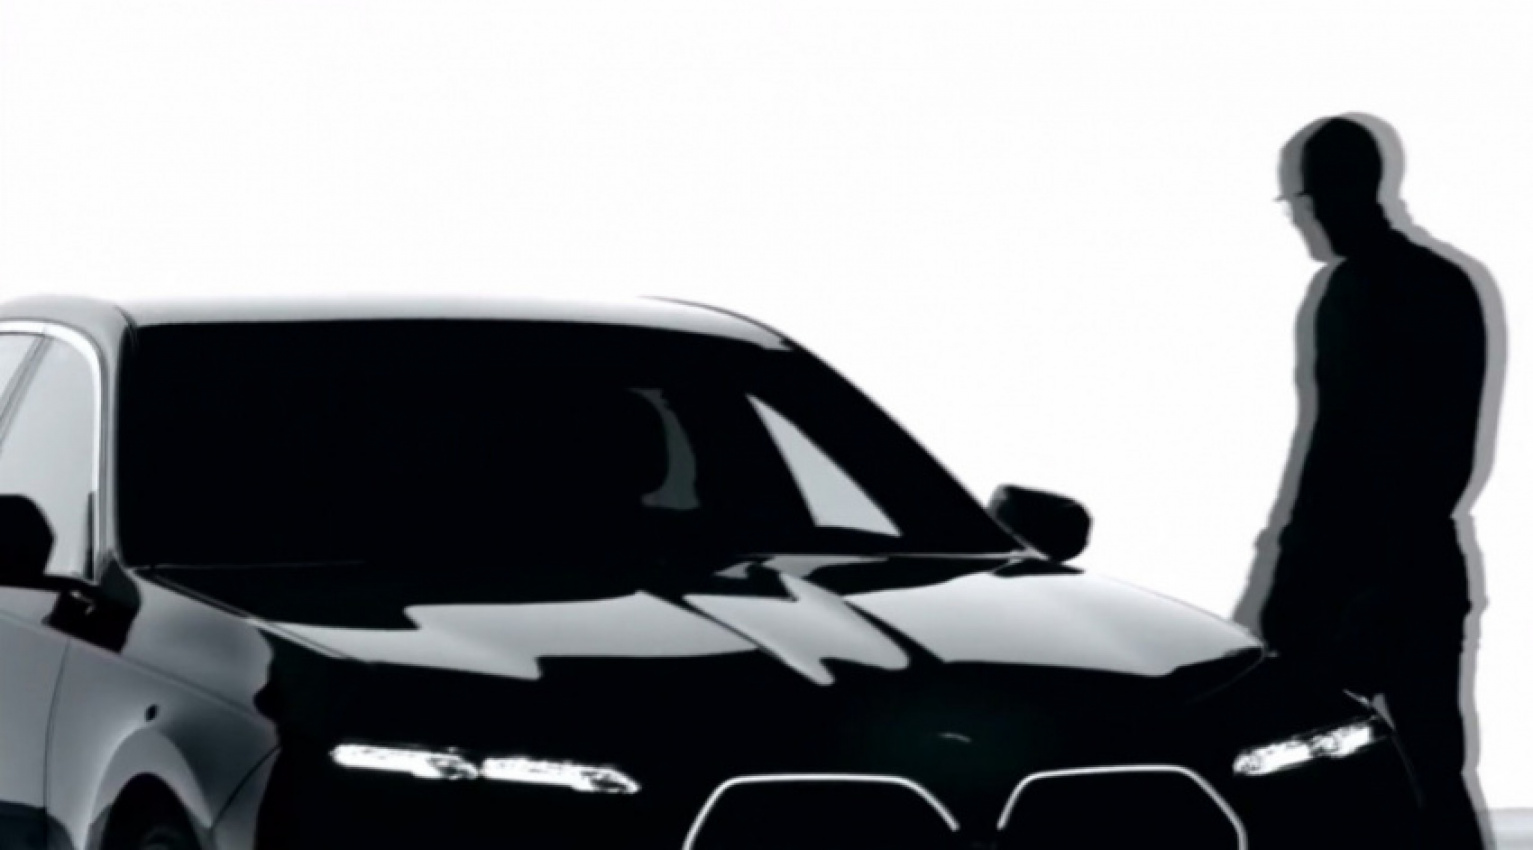 autos, bmw, cars, beijing auto show, bmw 7-series news, bmw news, luxury cars, sedans, self driving cars, 2023 bmw 7-series teased ahead of auto china 2022 debut